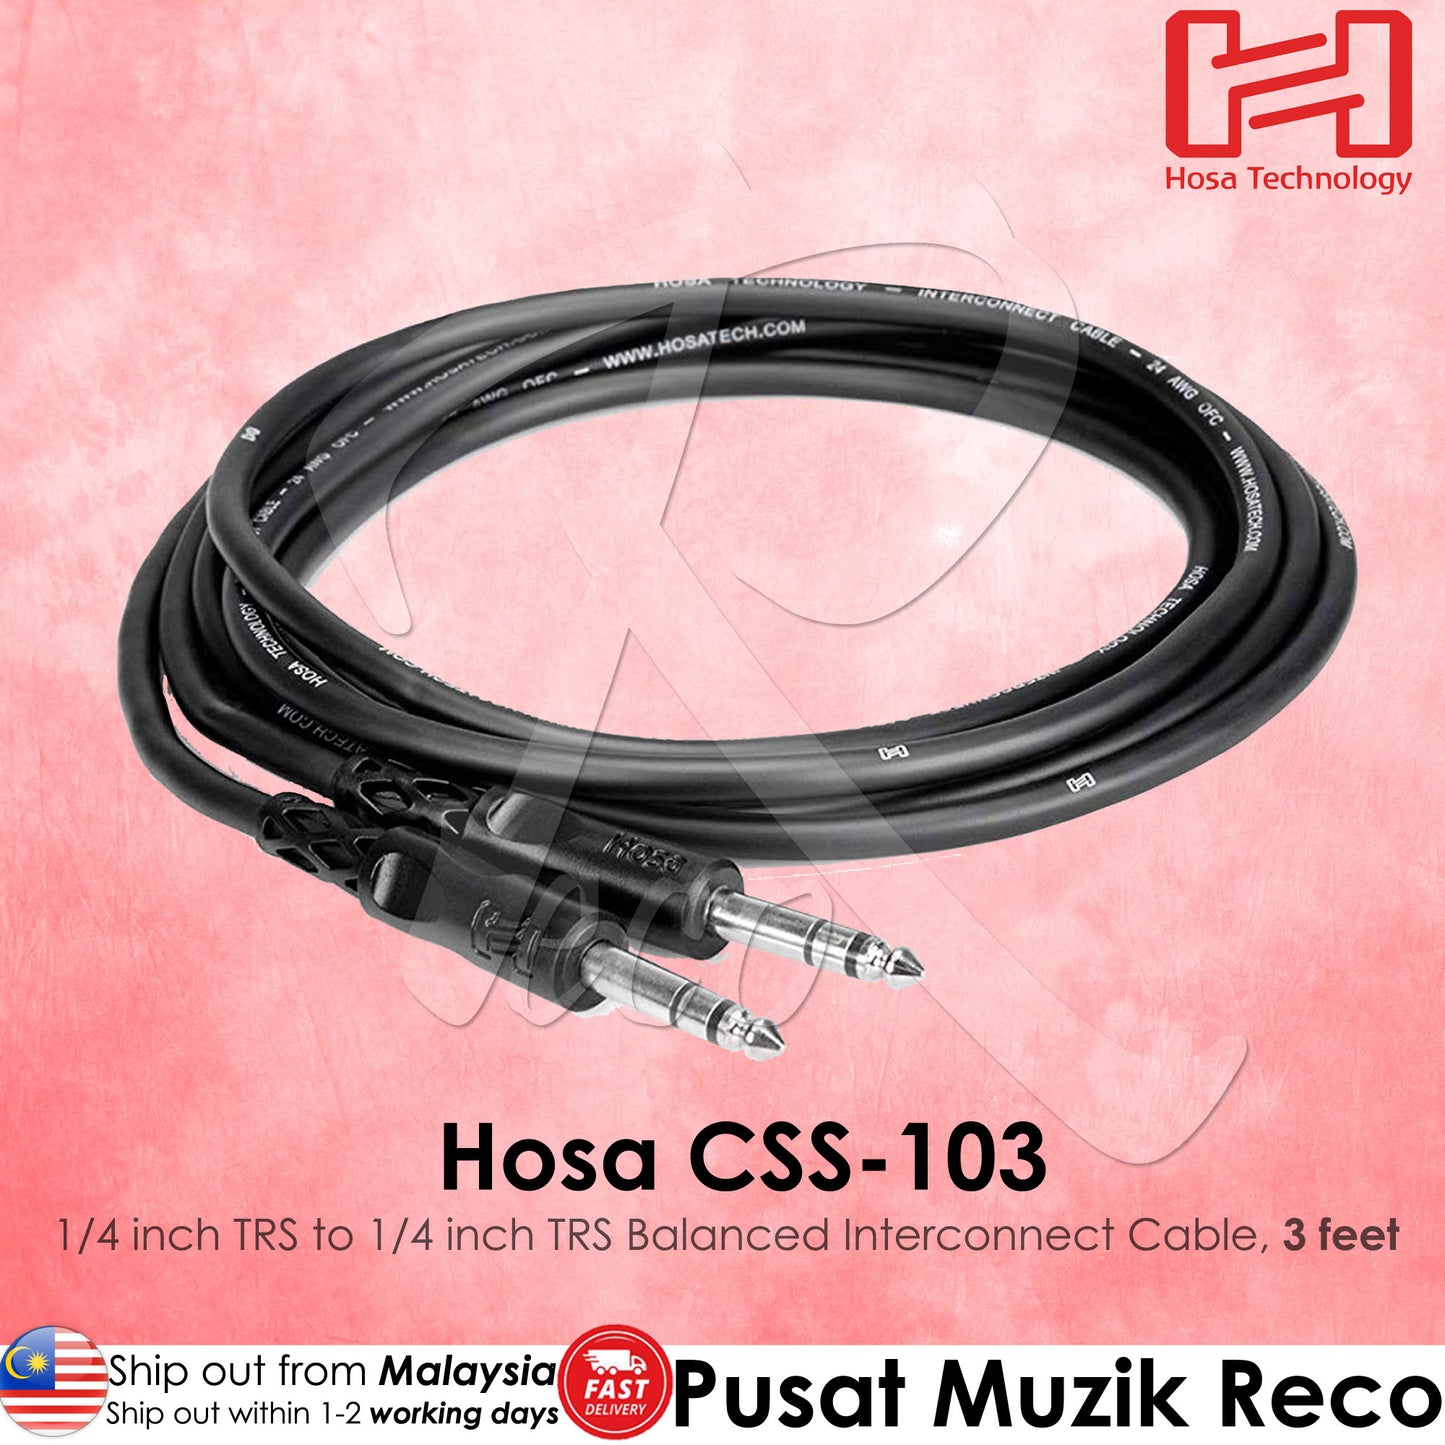 Hosa CSS-103 1/4 inch TRS to 1/4 inch TRS Balanced Interconnect Cable, 3 feet - Reco Music Malaysia